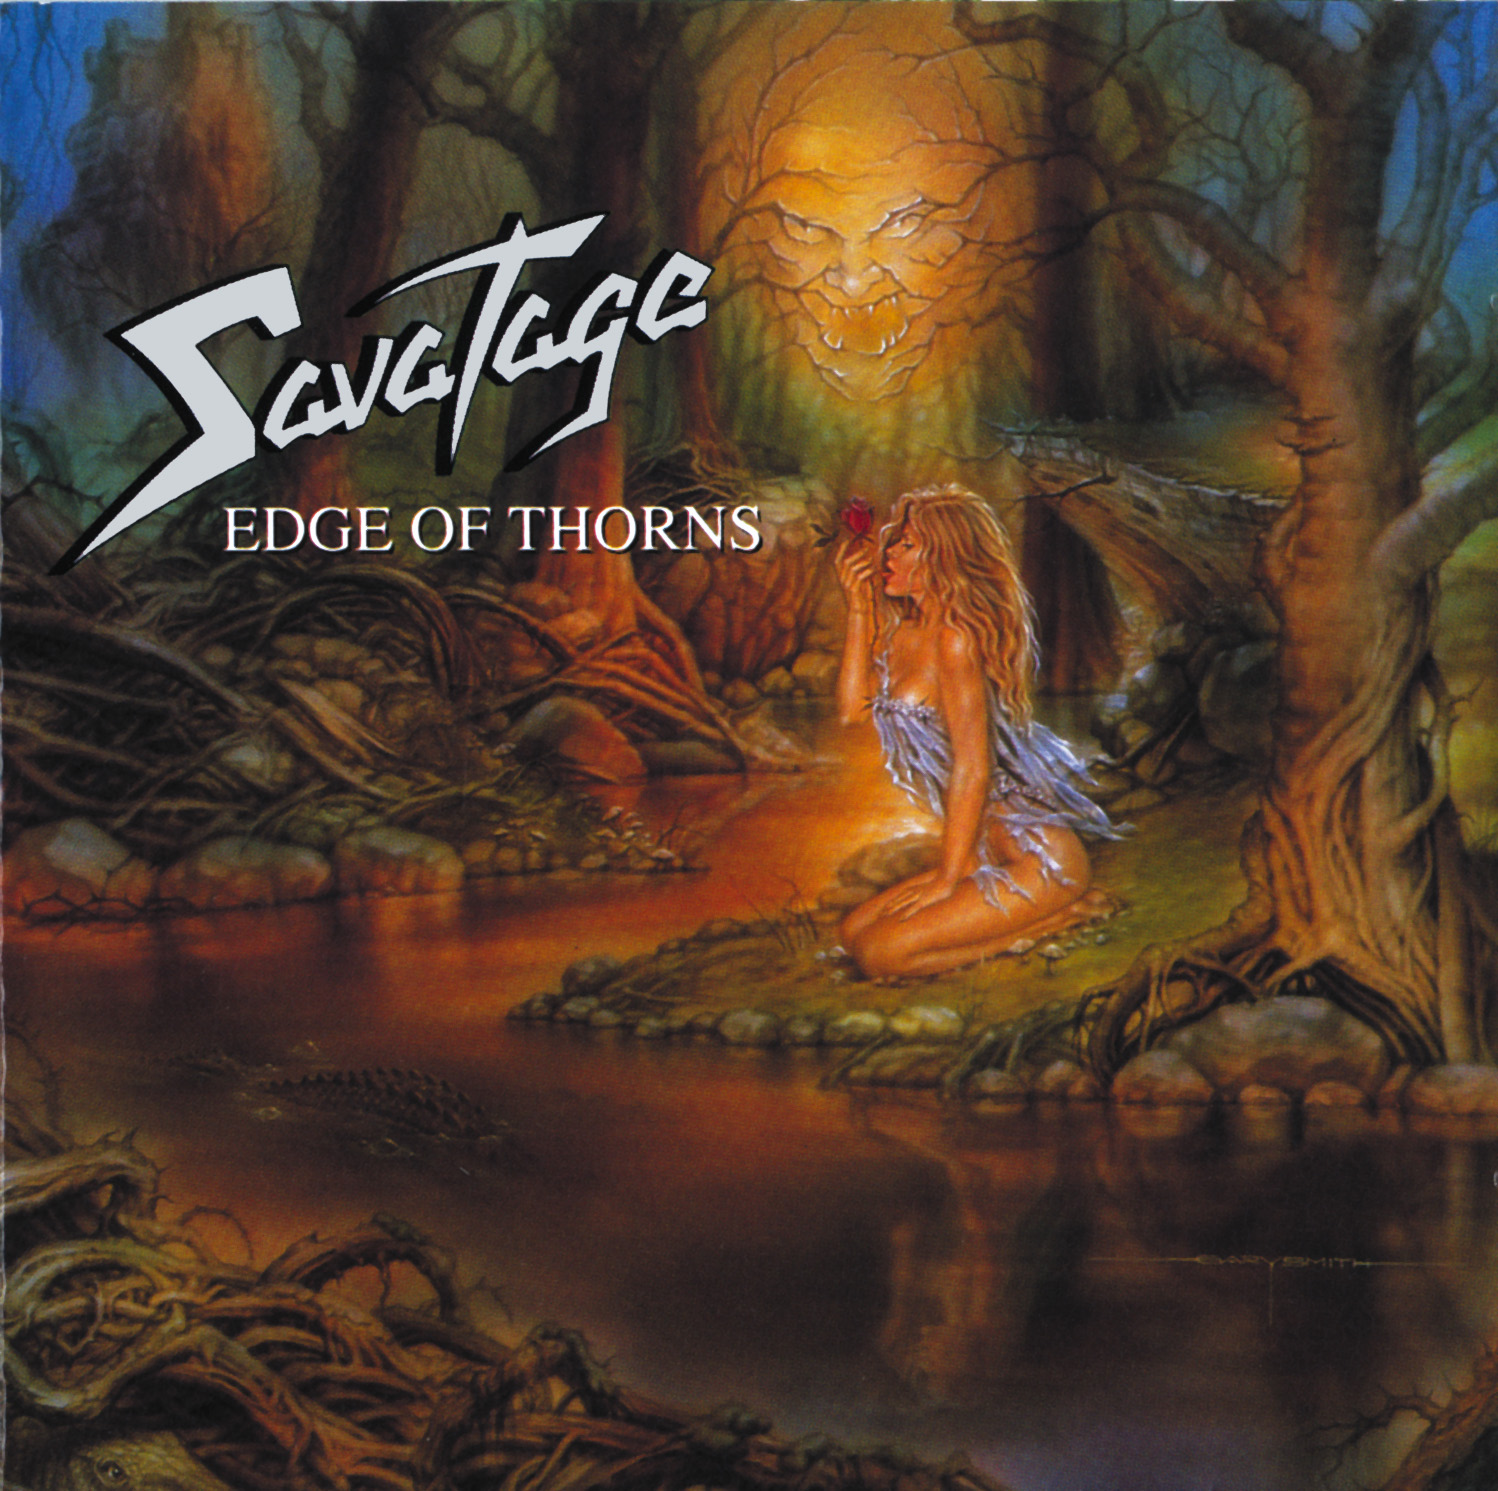 Savatage - Edge of Thorns (re-release) - CD